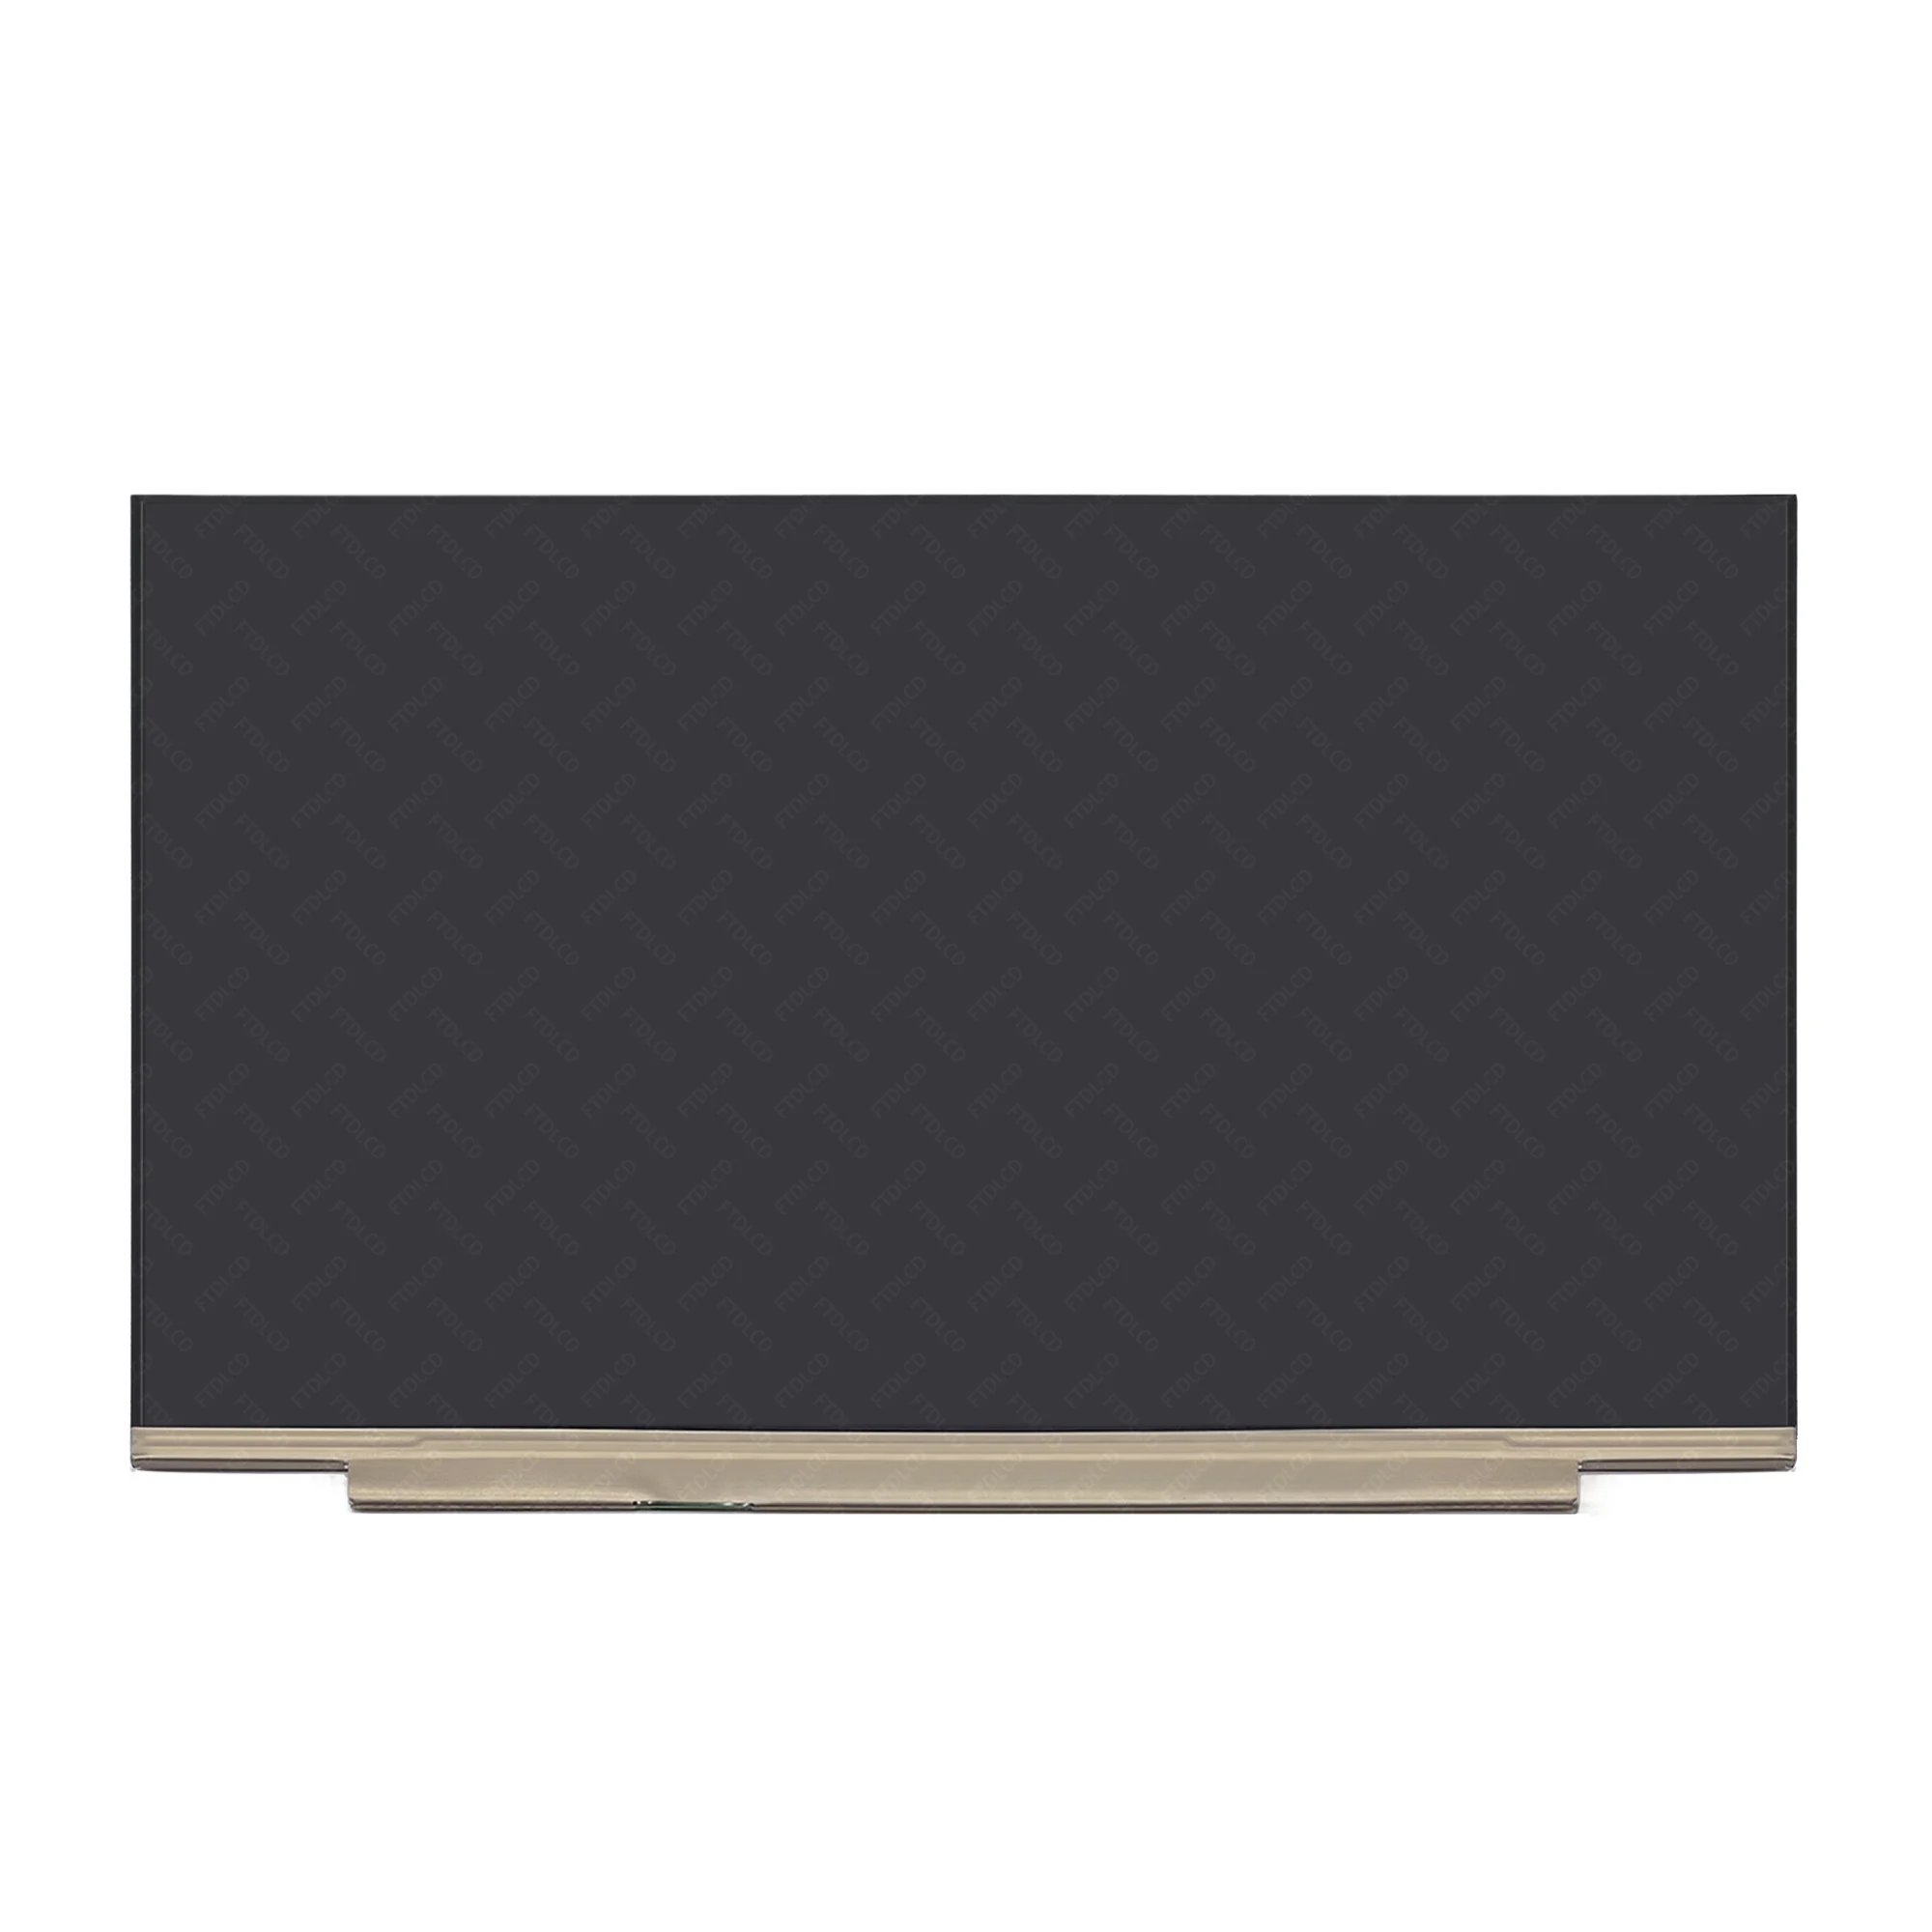 

15.6'' FHD IPS LCD On-Cell Touch Screen Display Panel Matrix For Lenovo IdeaPad S340-15IIL 1920X1080 40 Pins Narrow 60 Hz